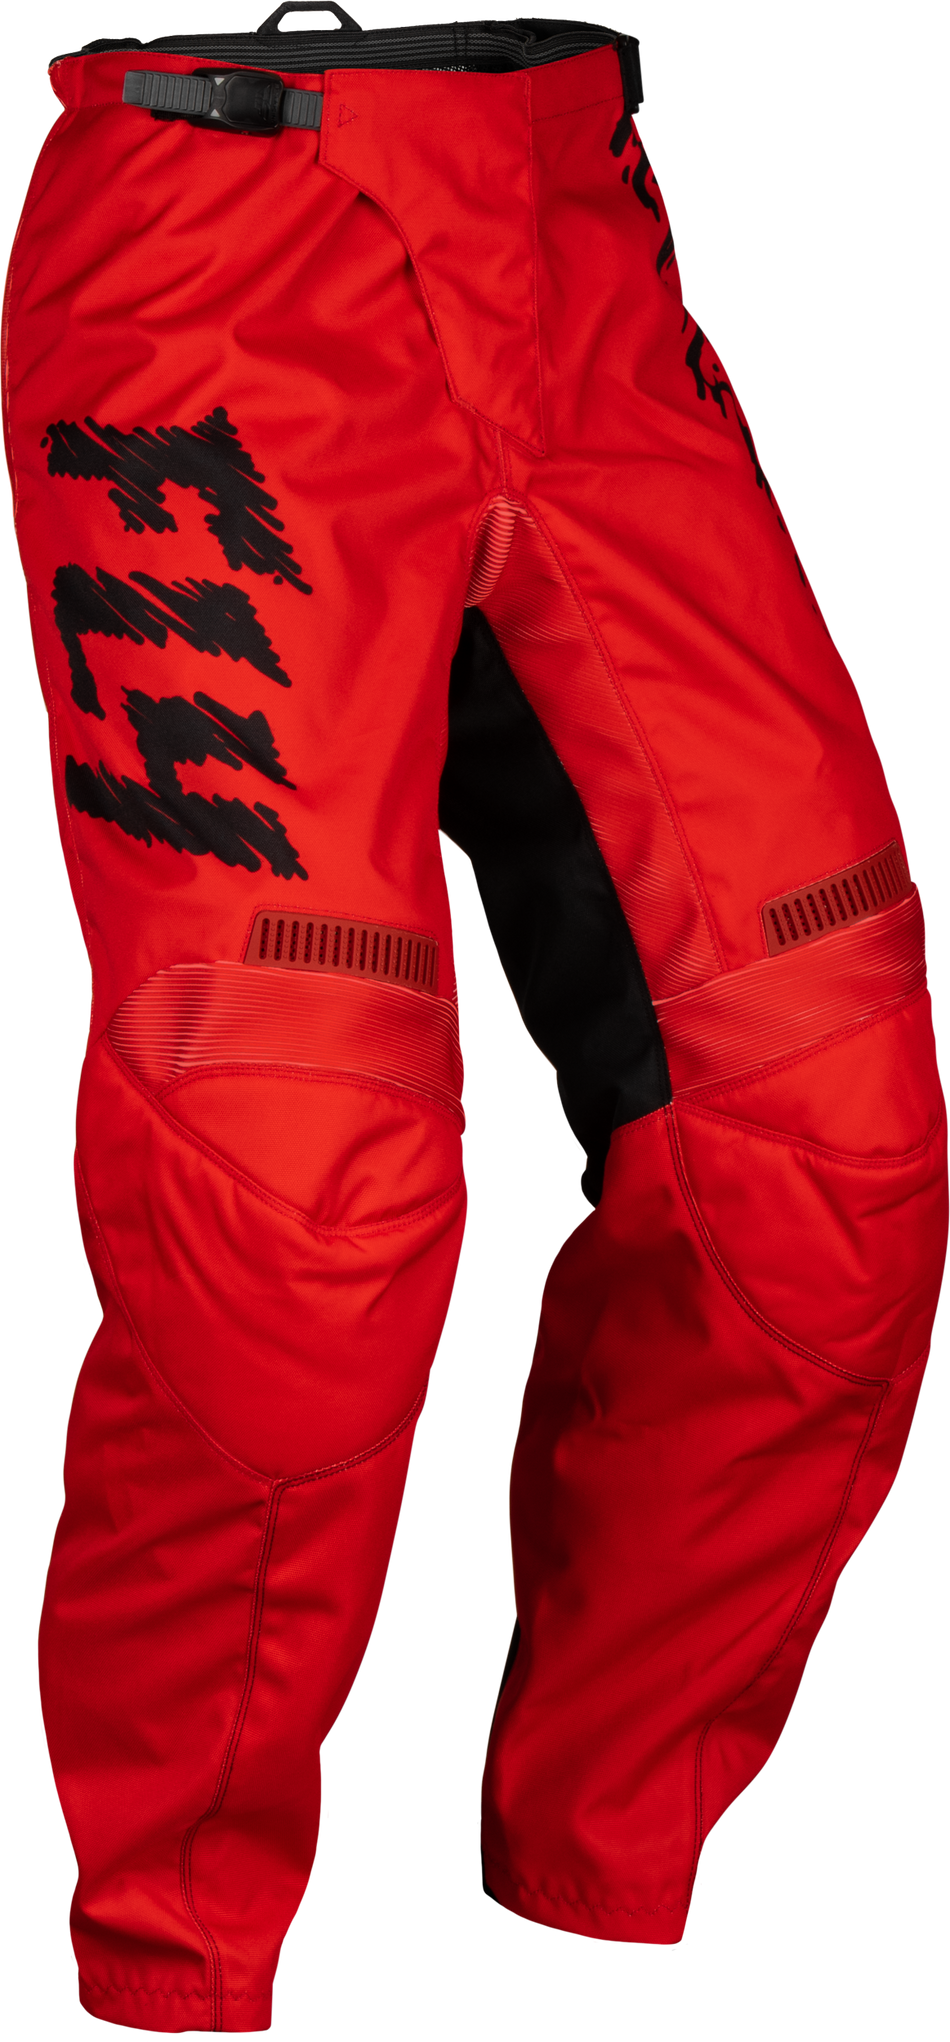 FLY RACING Youth F-16 Pants Red/Black/Grey Sz 22 377-23222